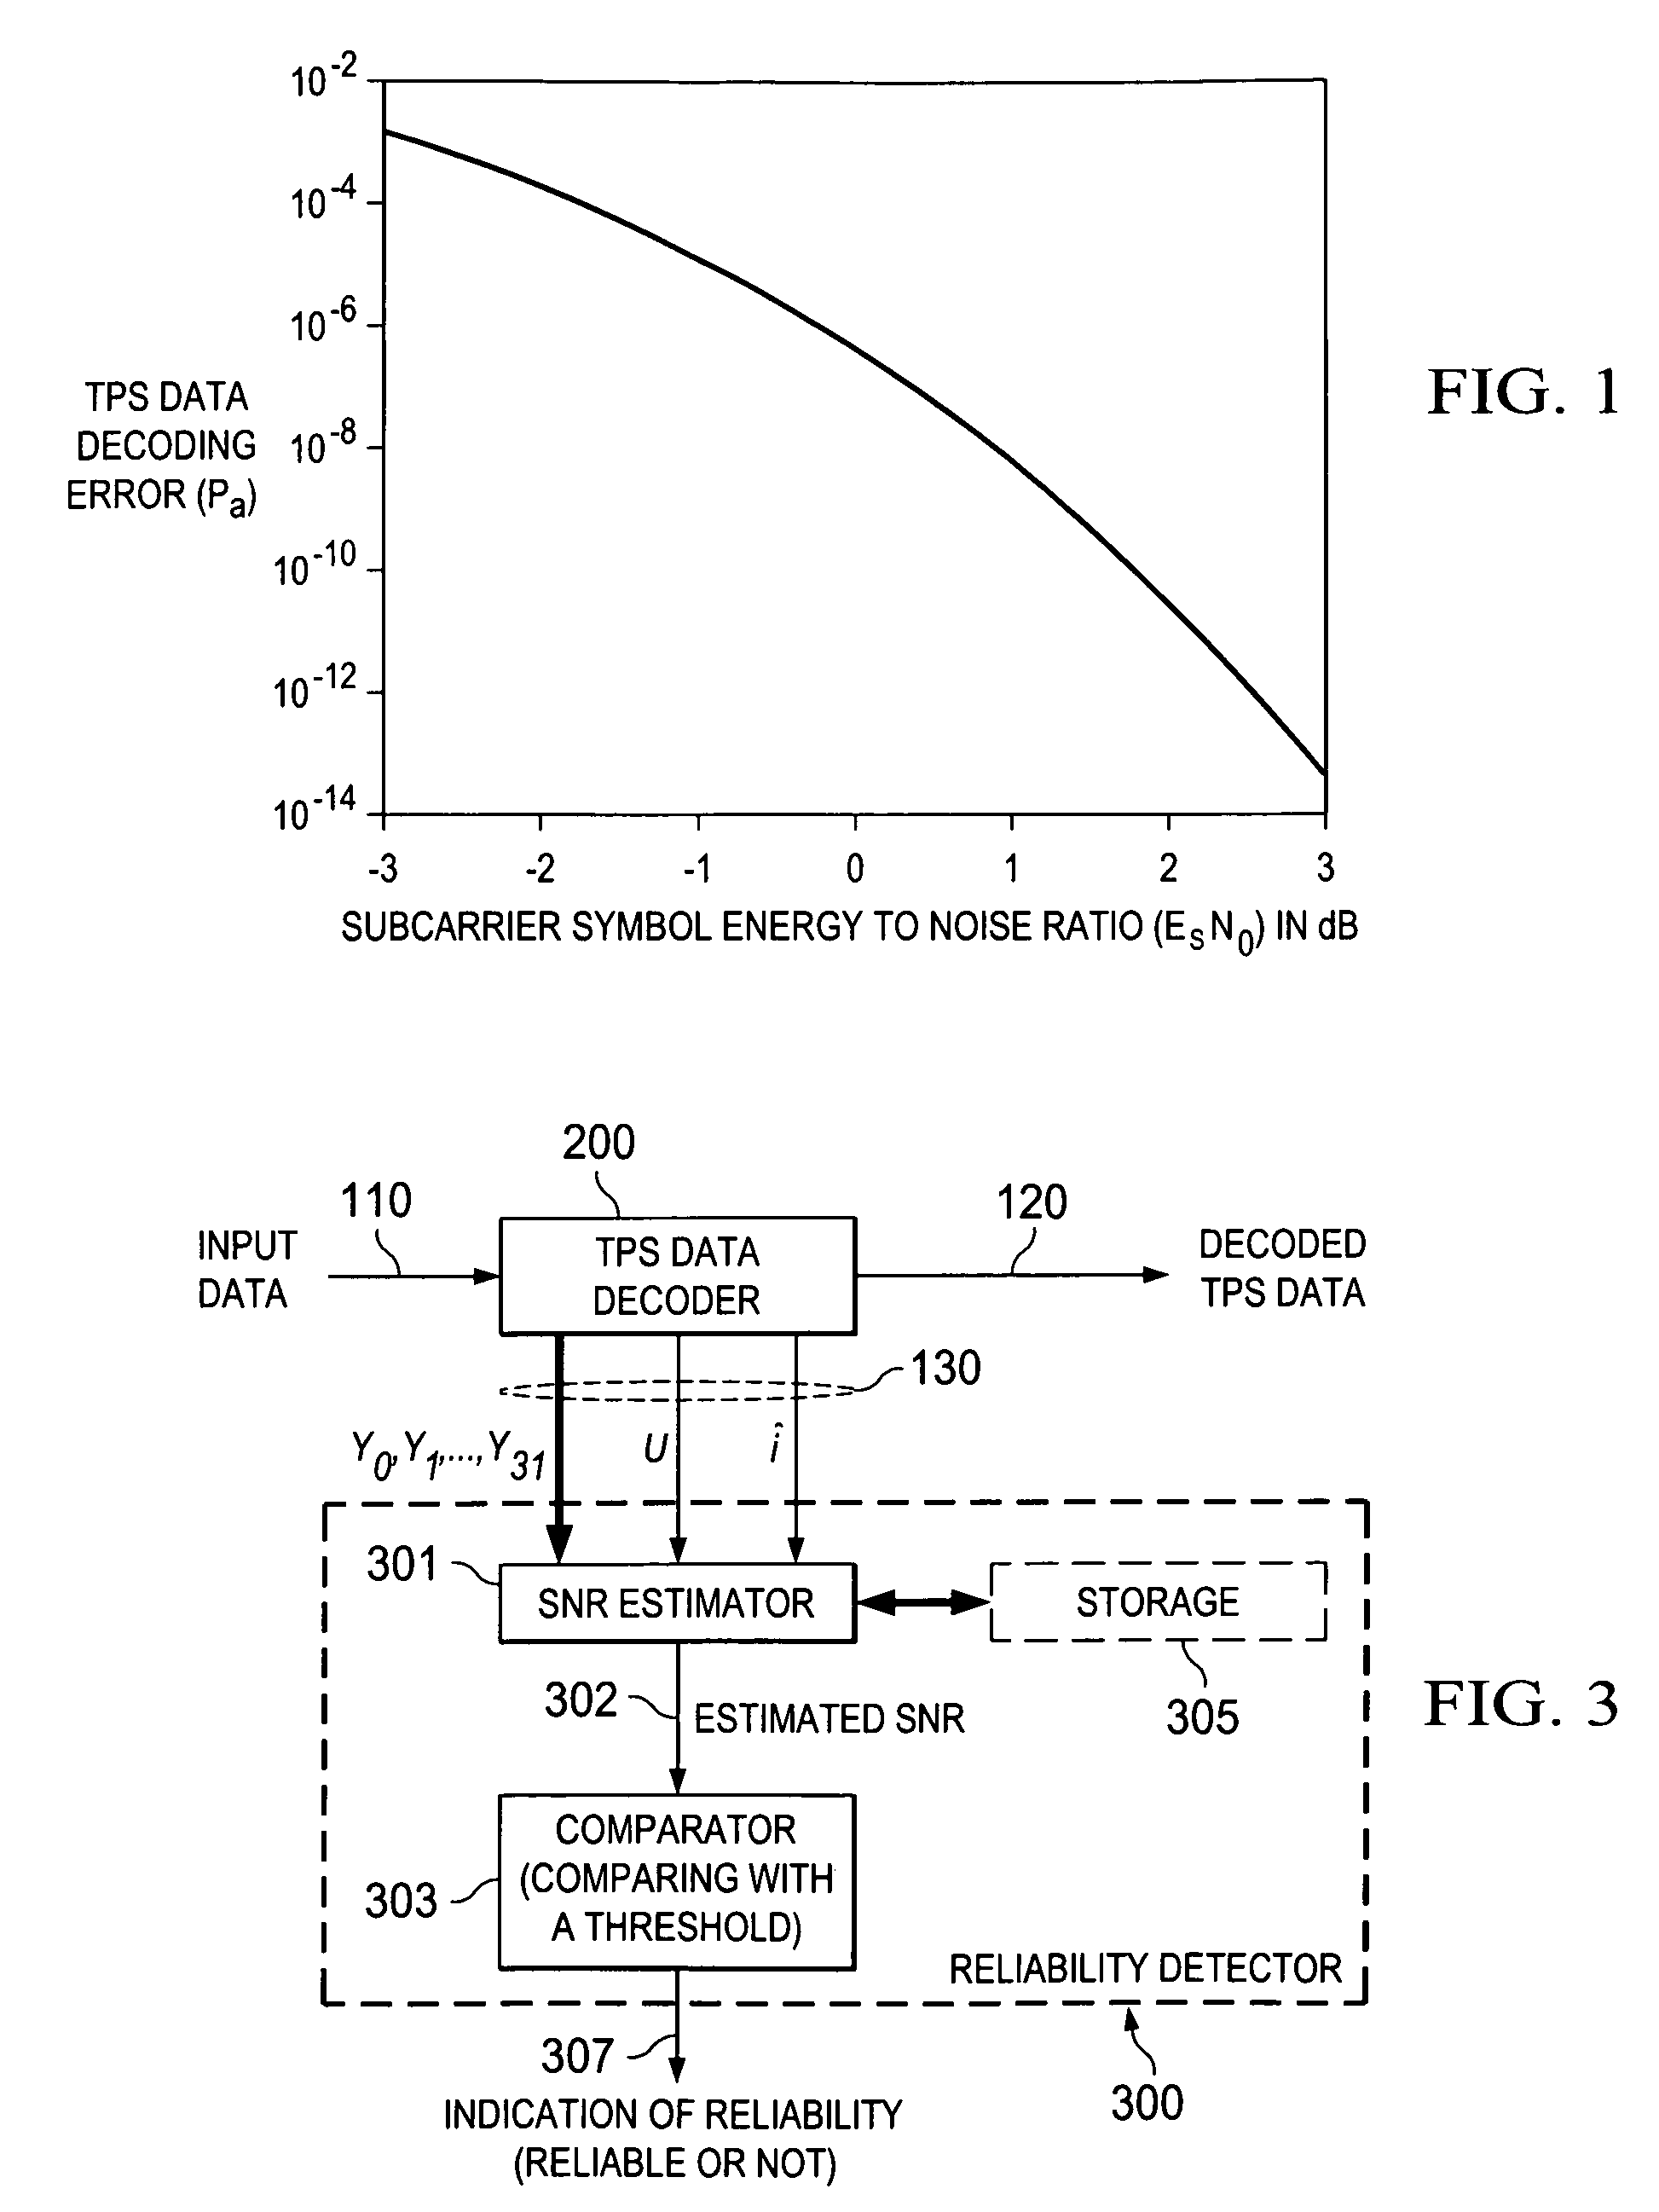 Reliability detector for tps data decoding, particularly in digital televisions